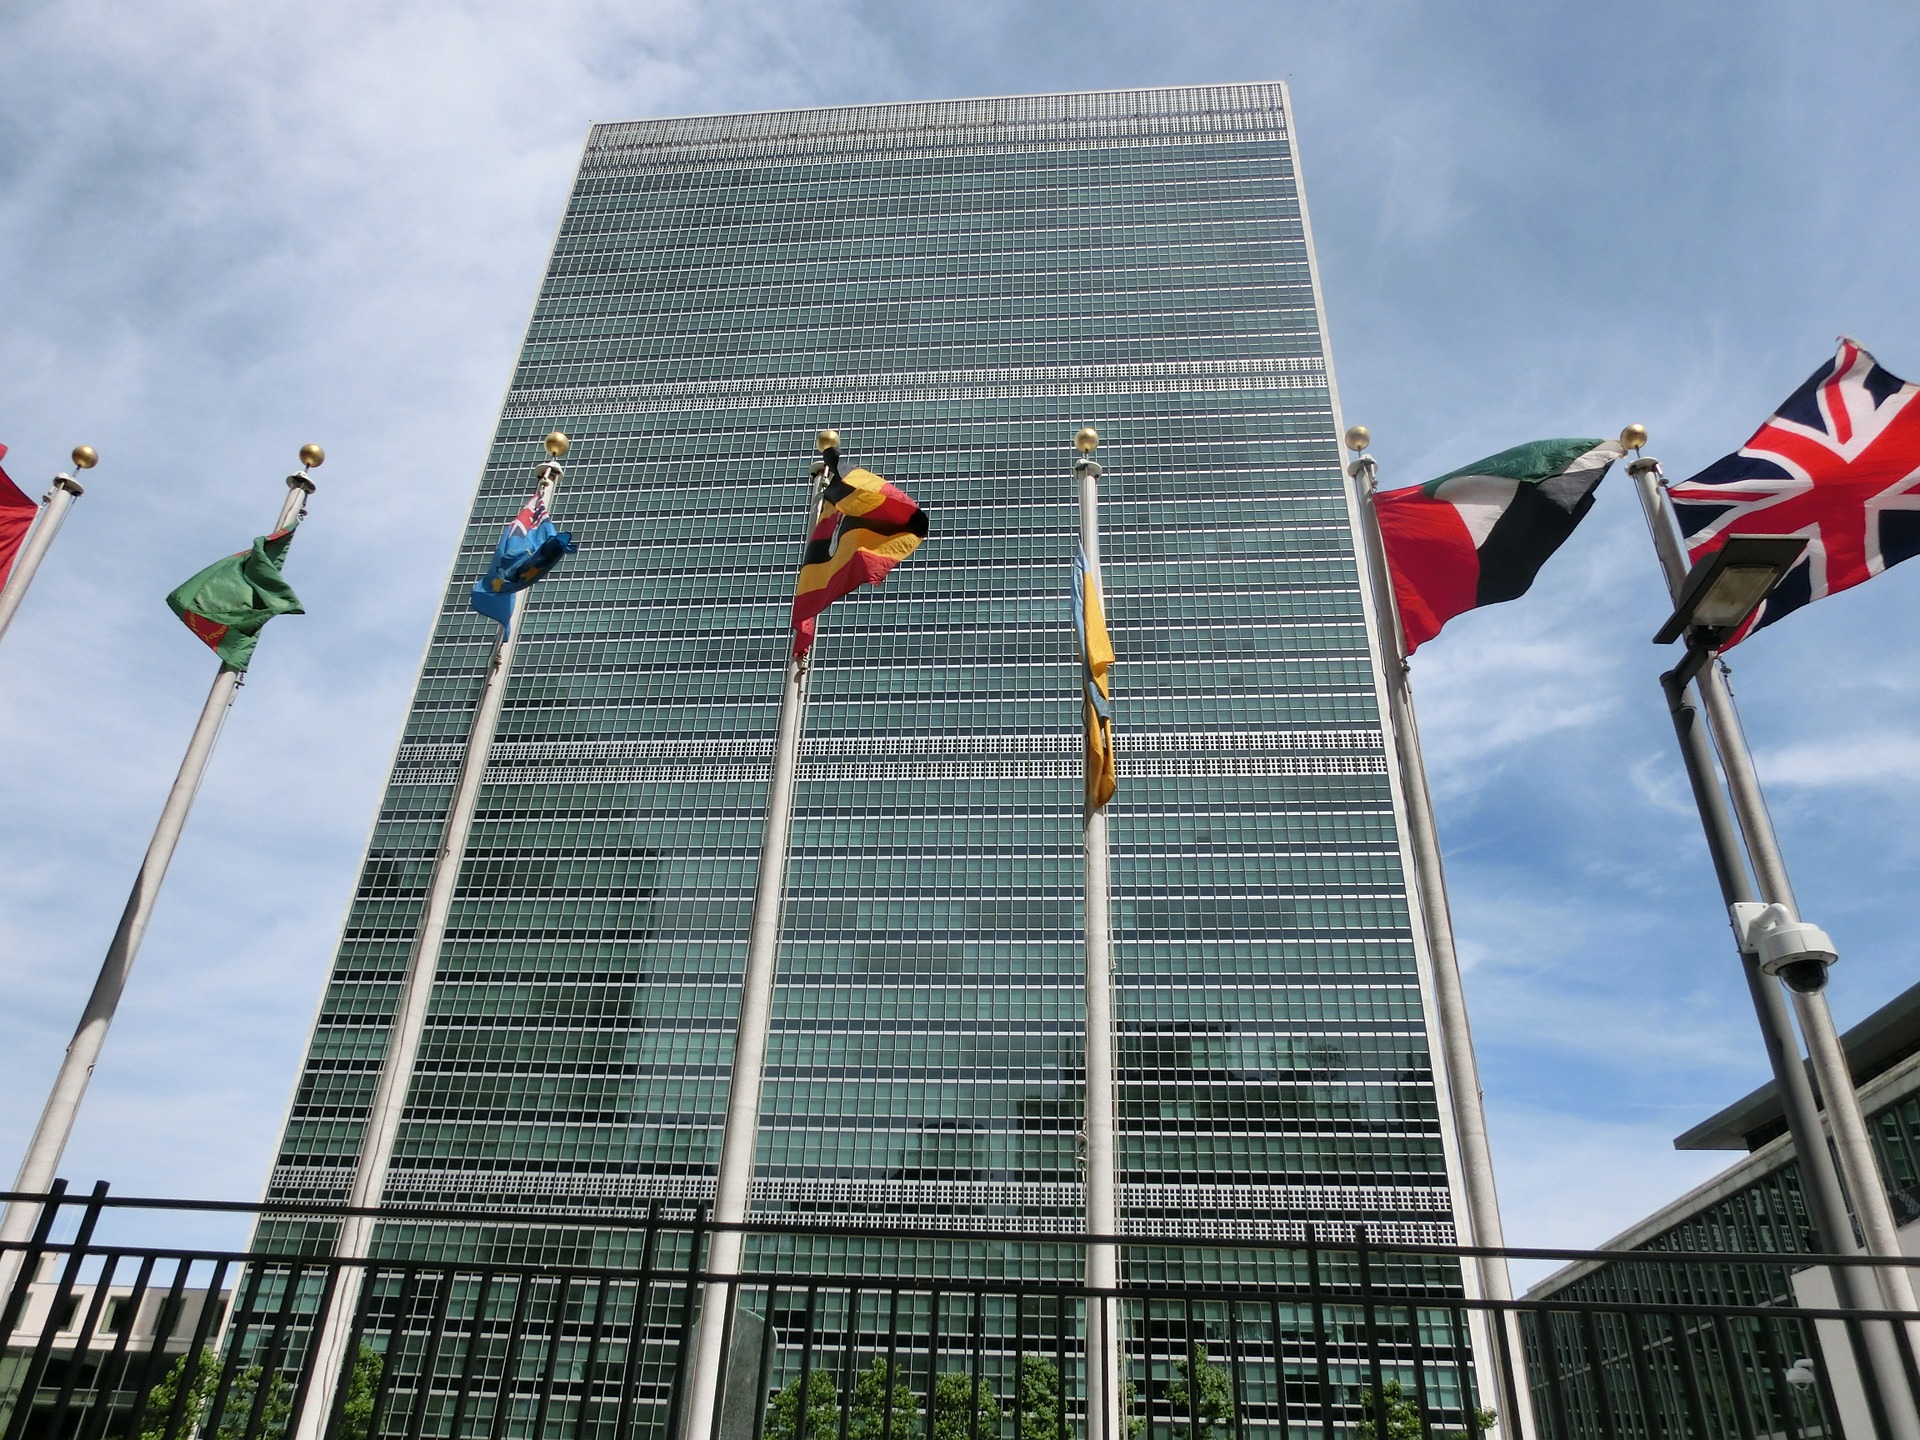 UN building in New Work with national flags in the foreground